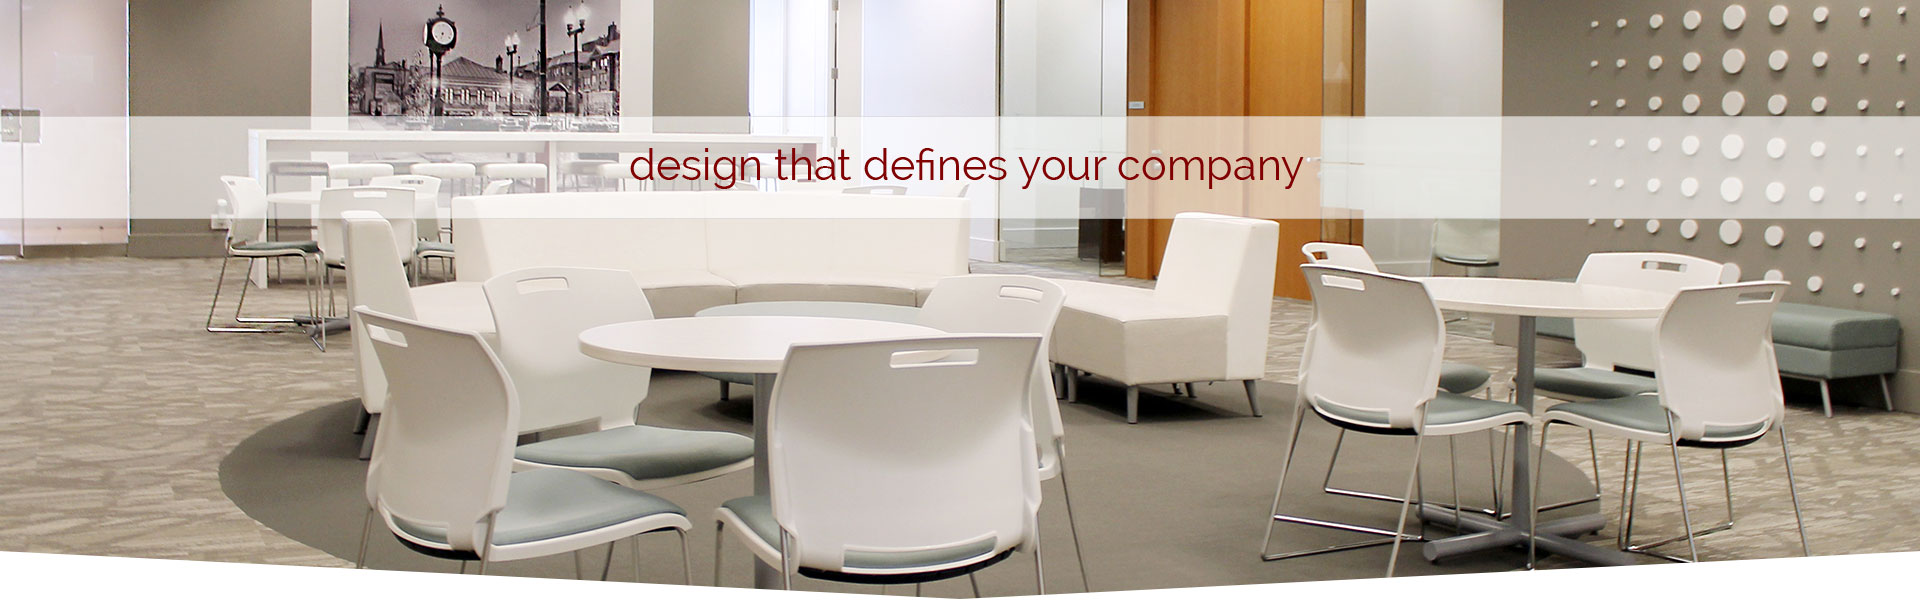 design-that-defines-your-company